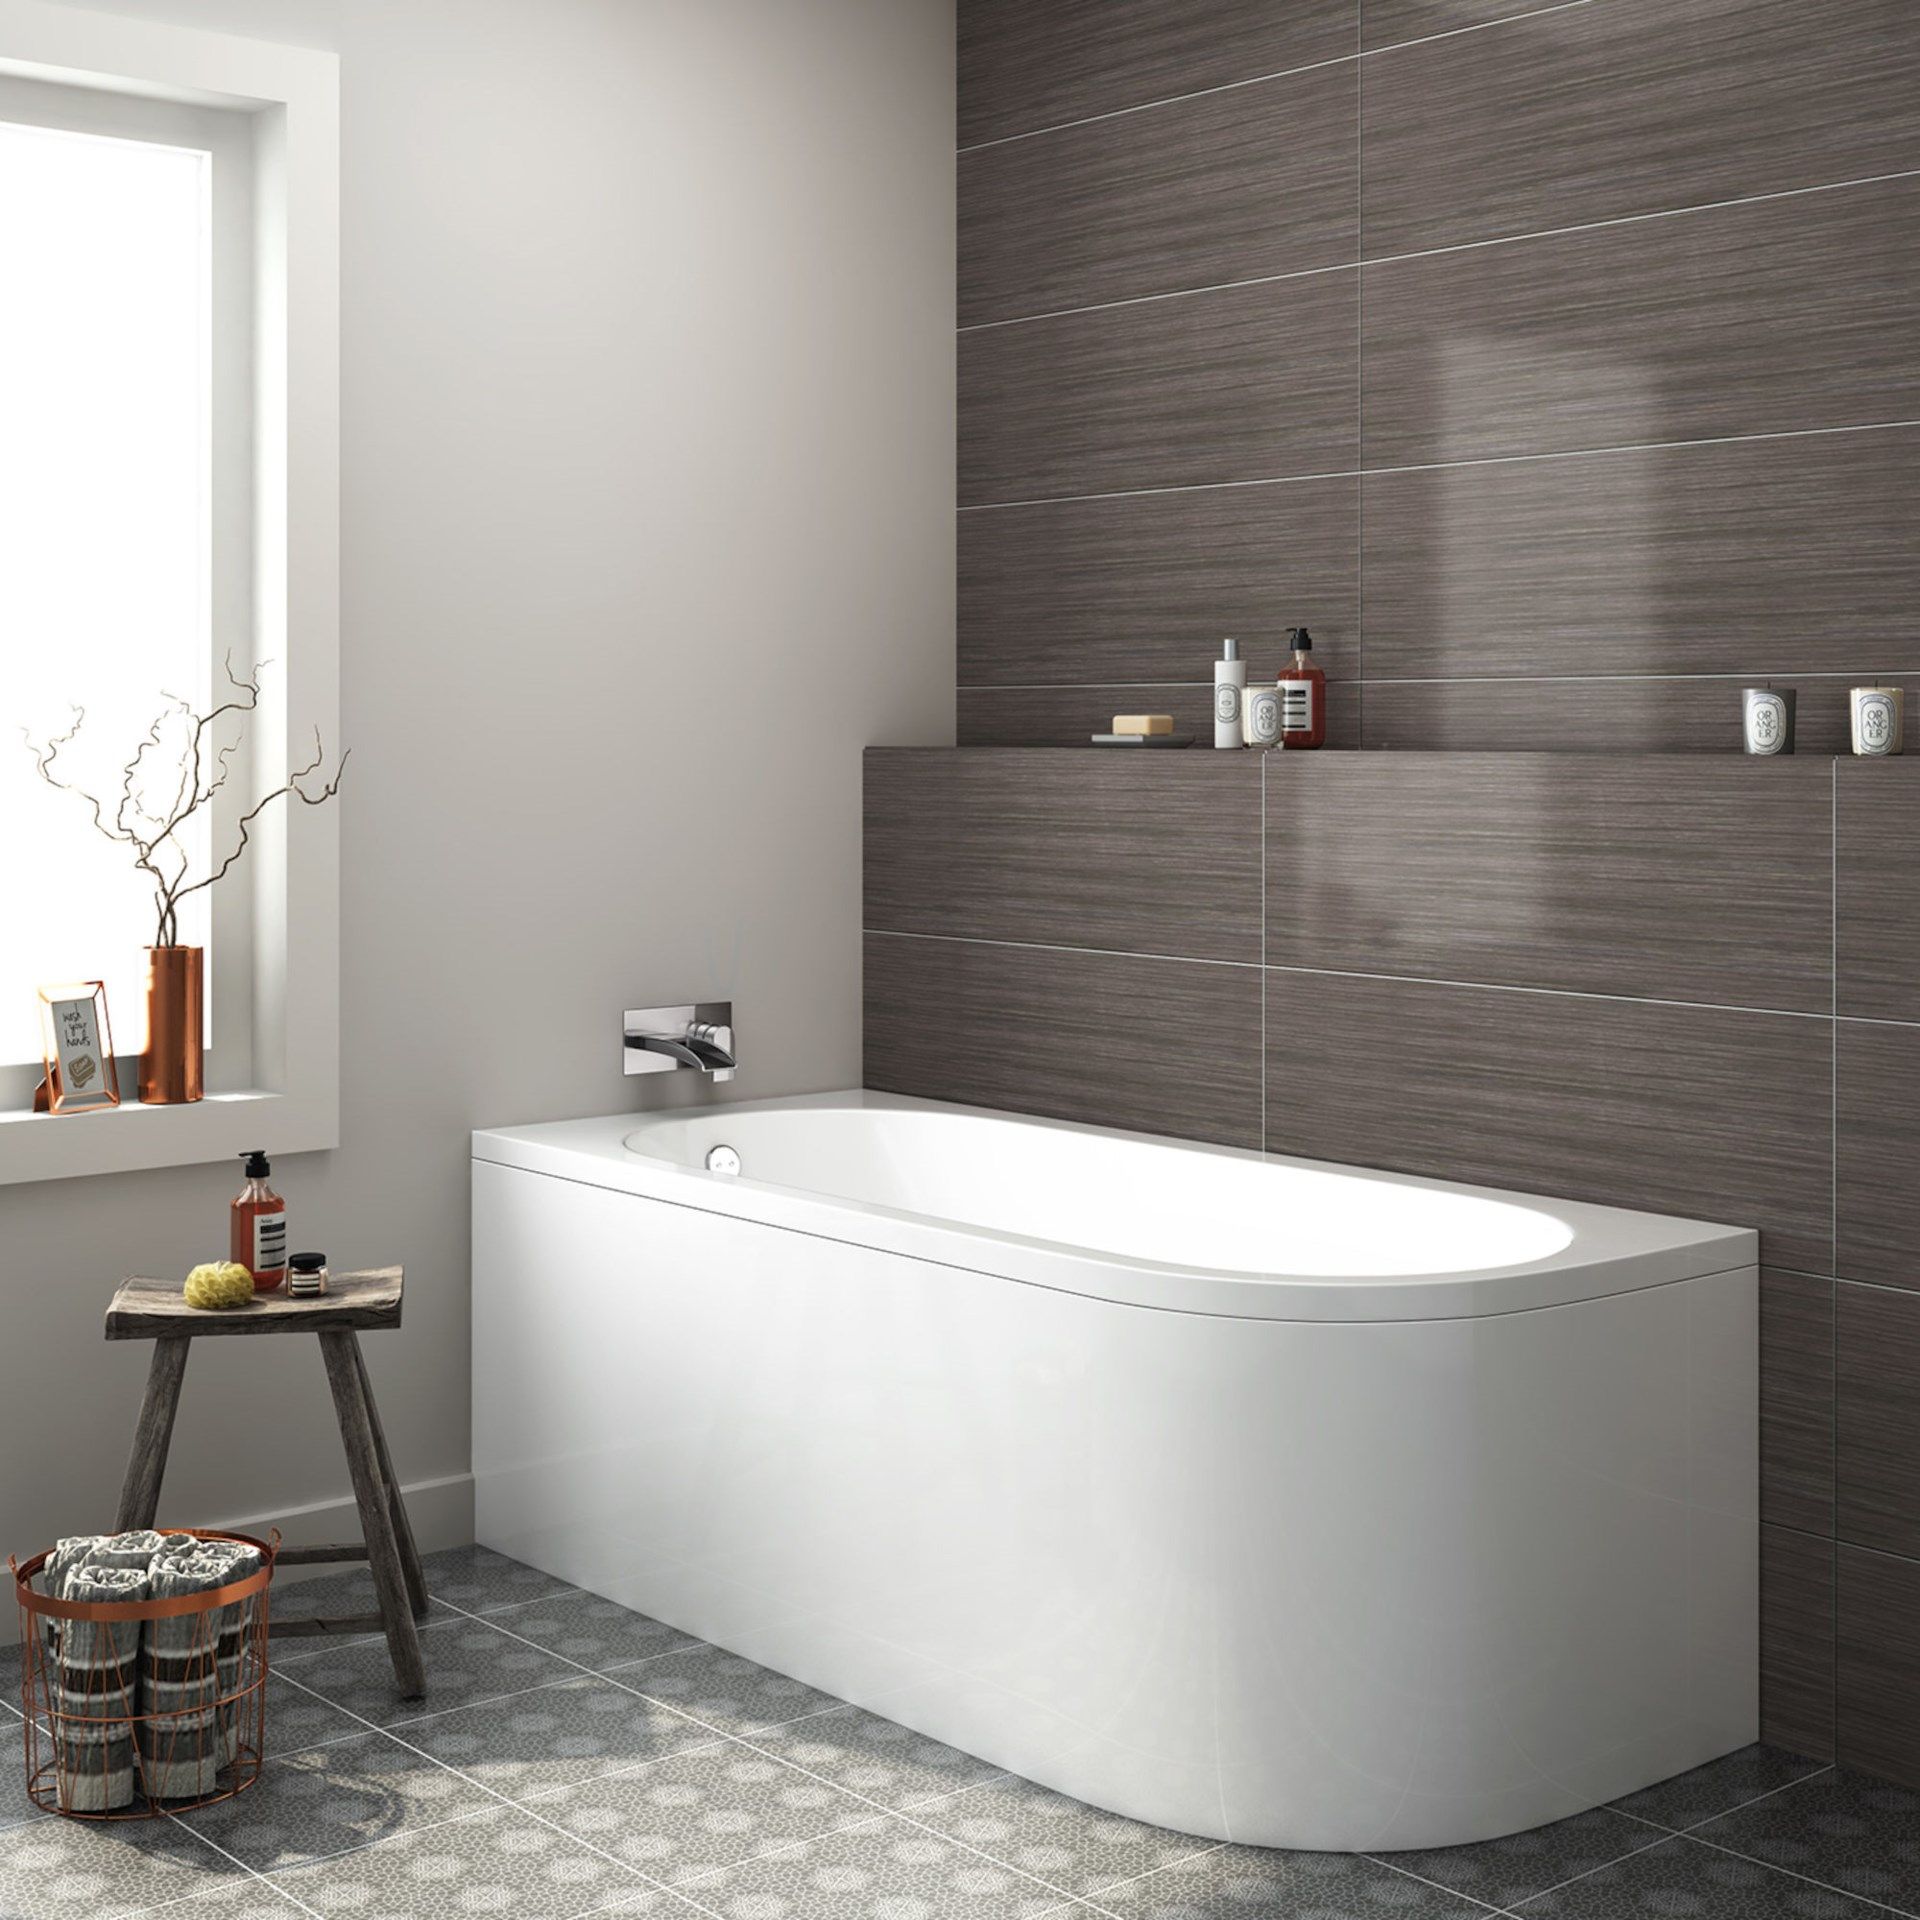 (KL94) 1695x745mm Denver Corner Back to Wall Bath (Includes Panels) - Left Hand. RRP £499.99. Double